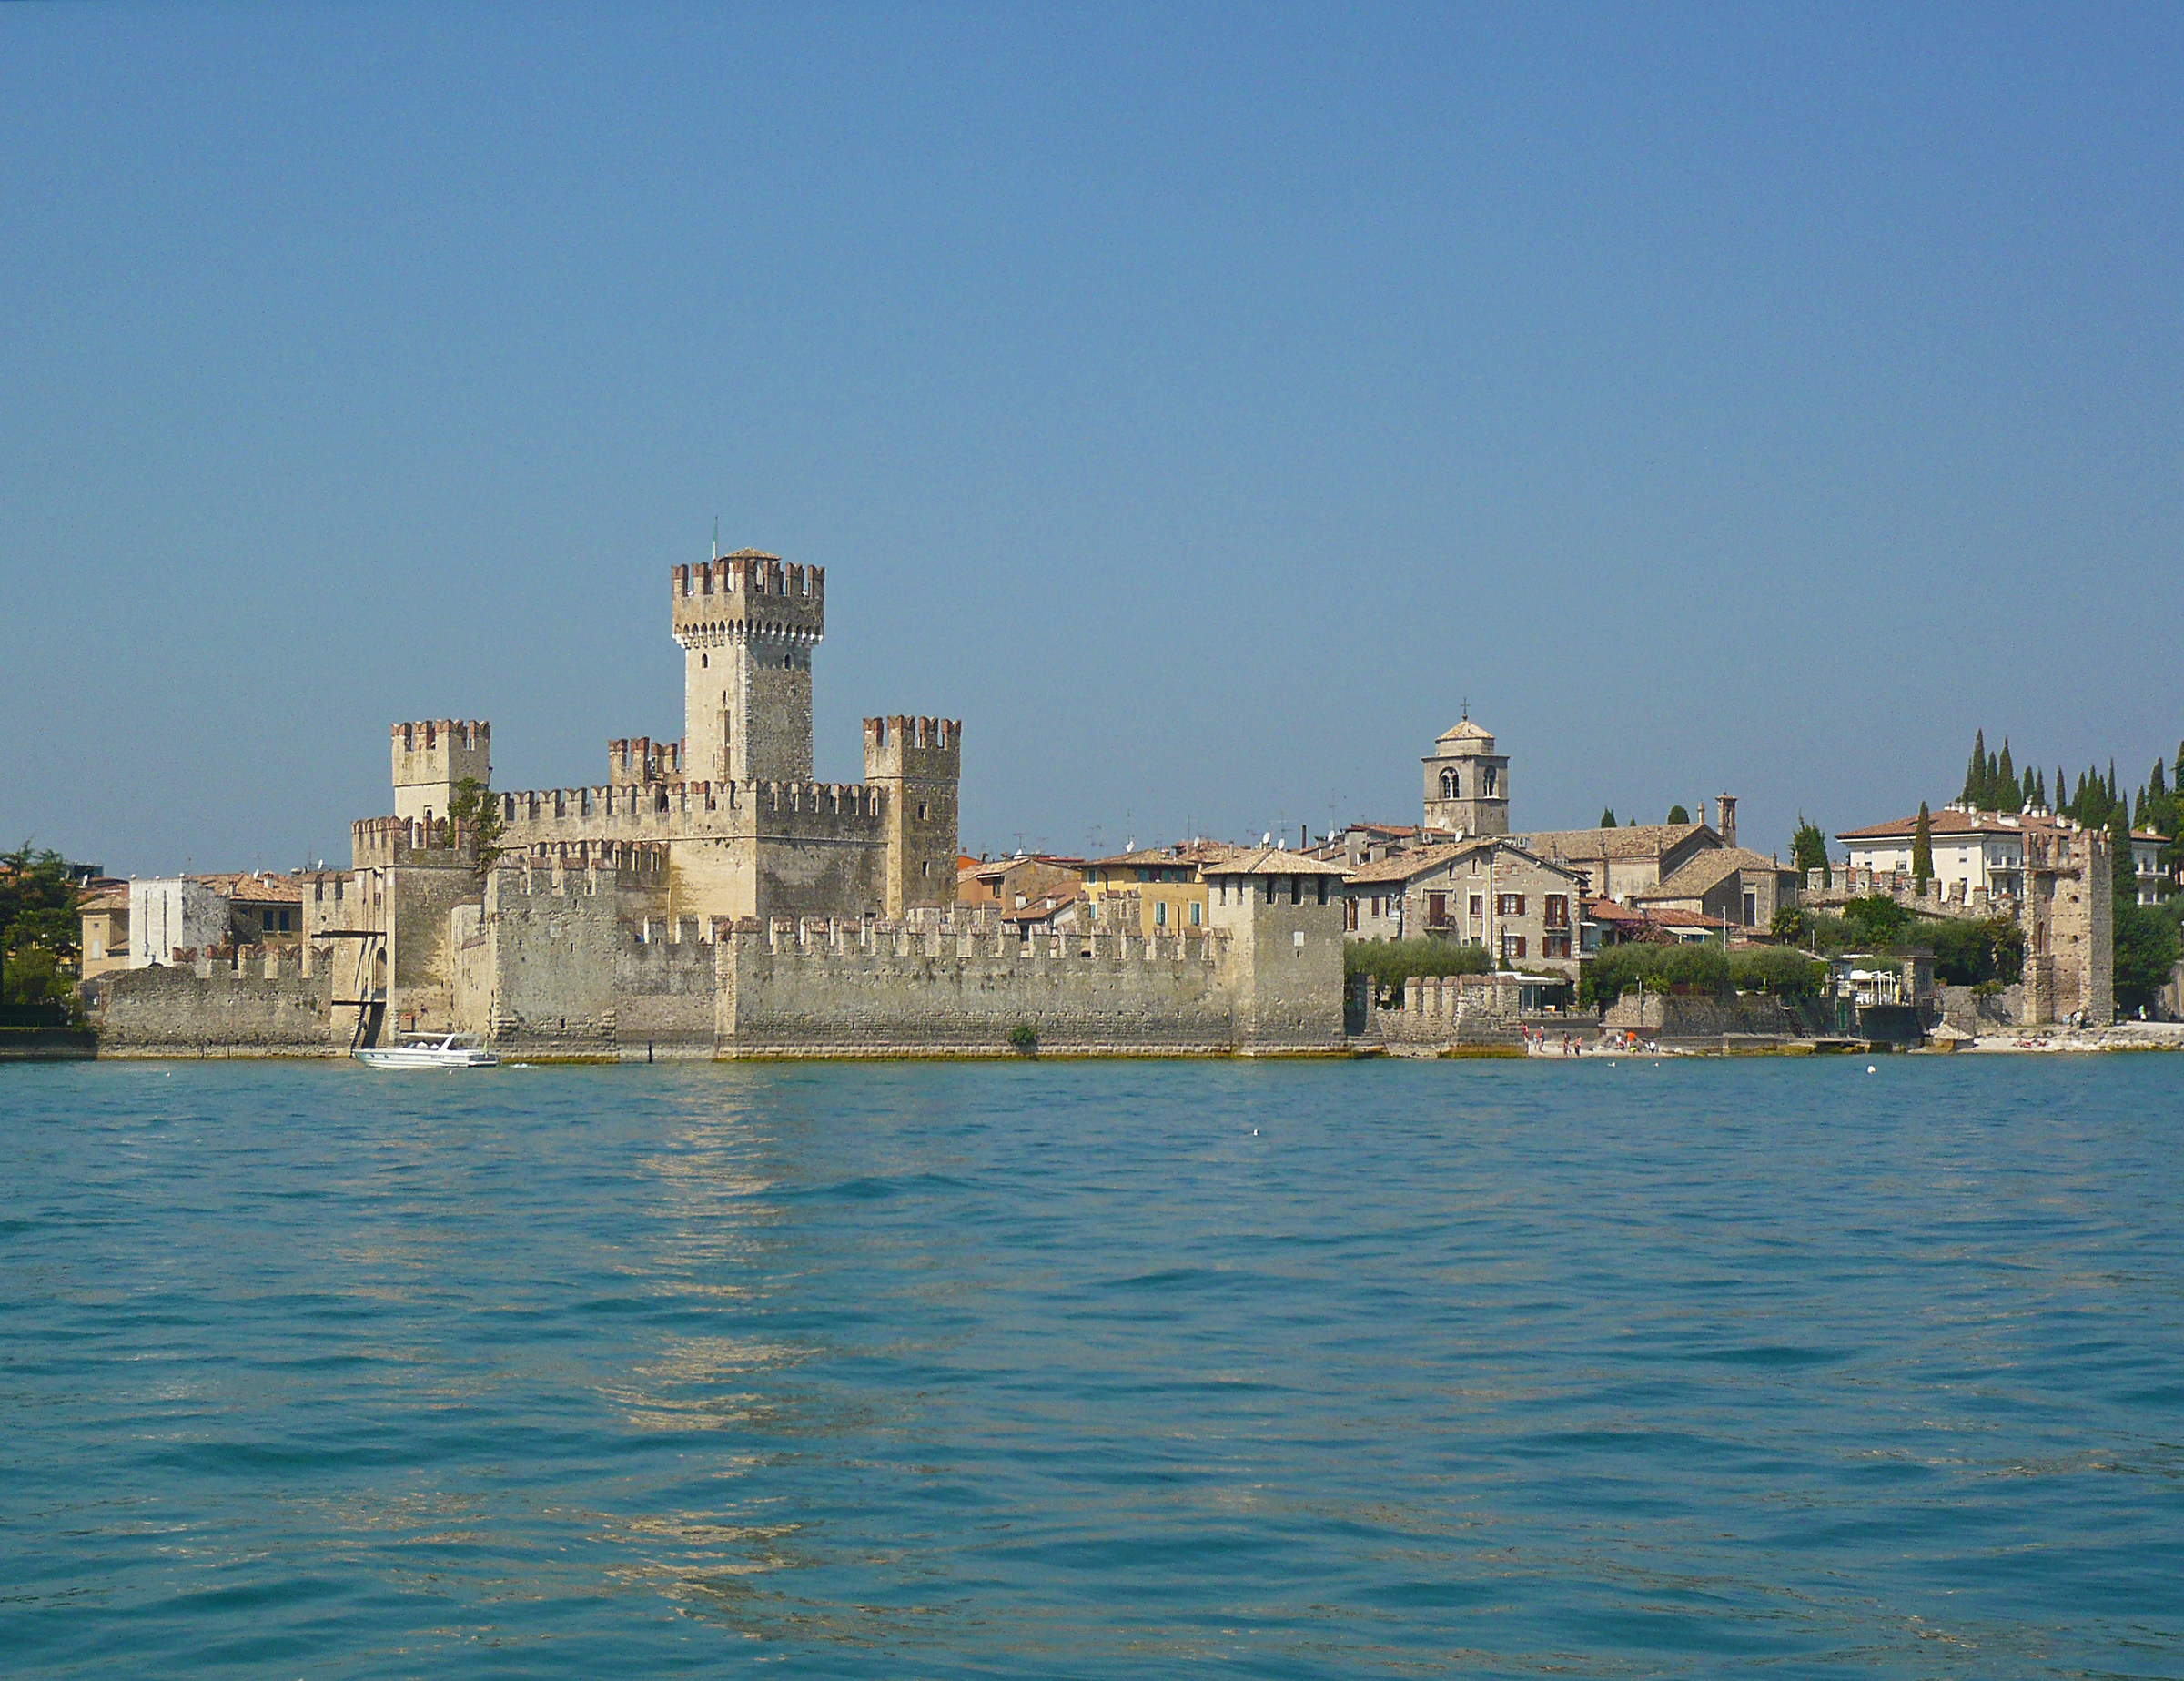 Sirmione - The fortress Scala...